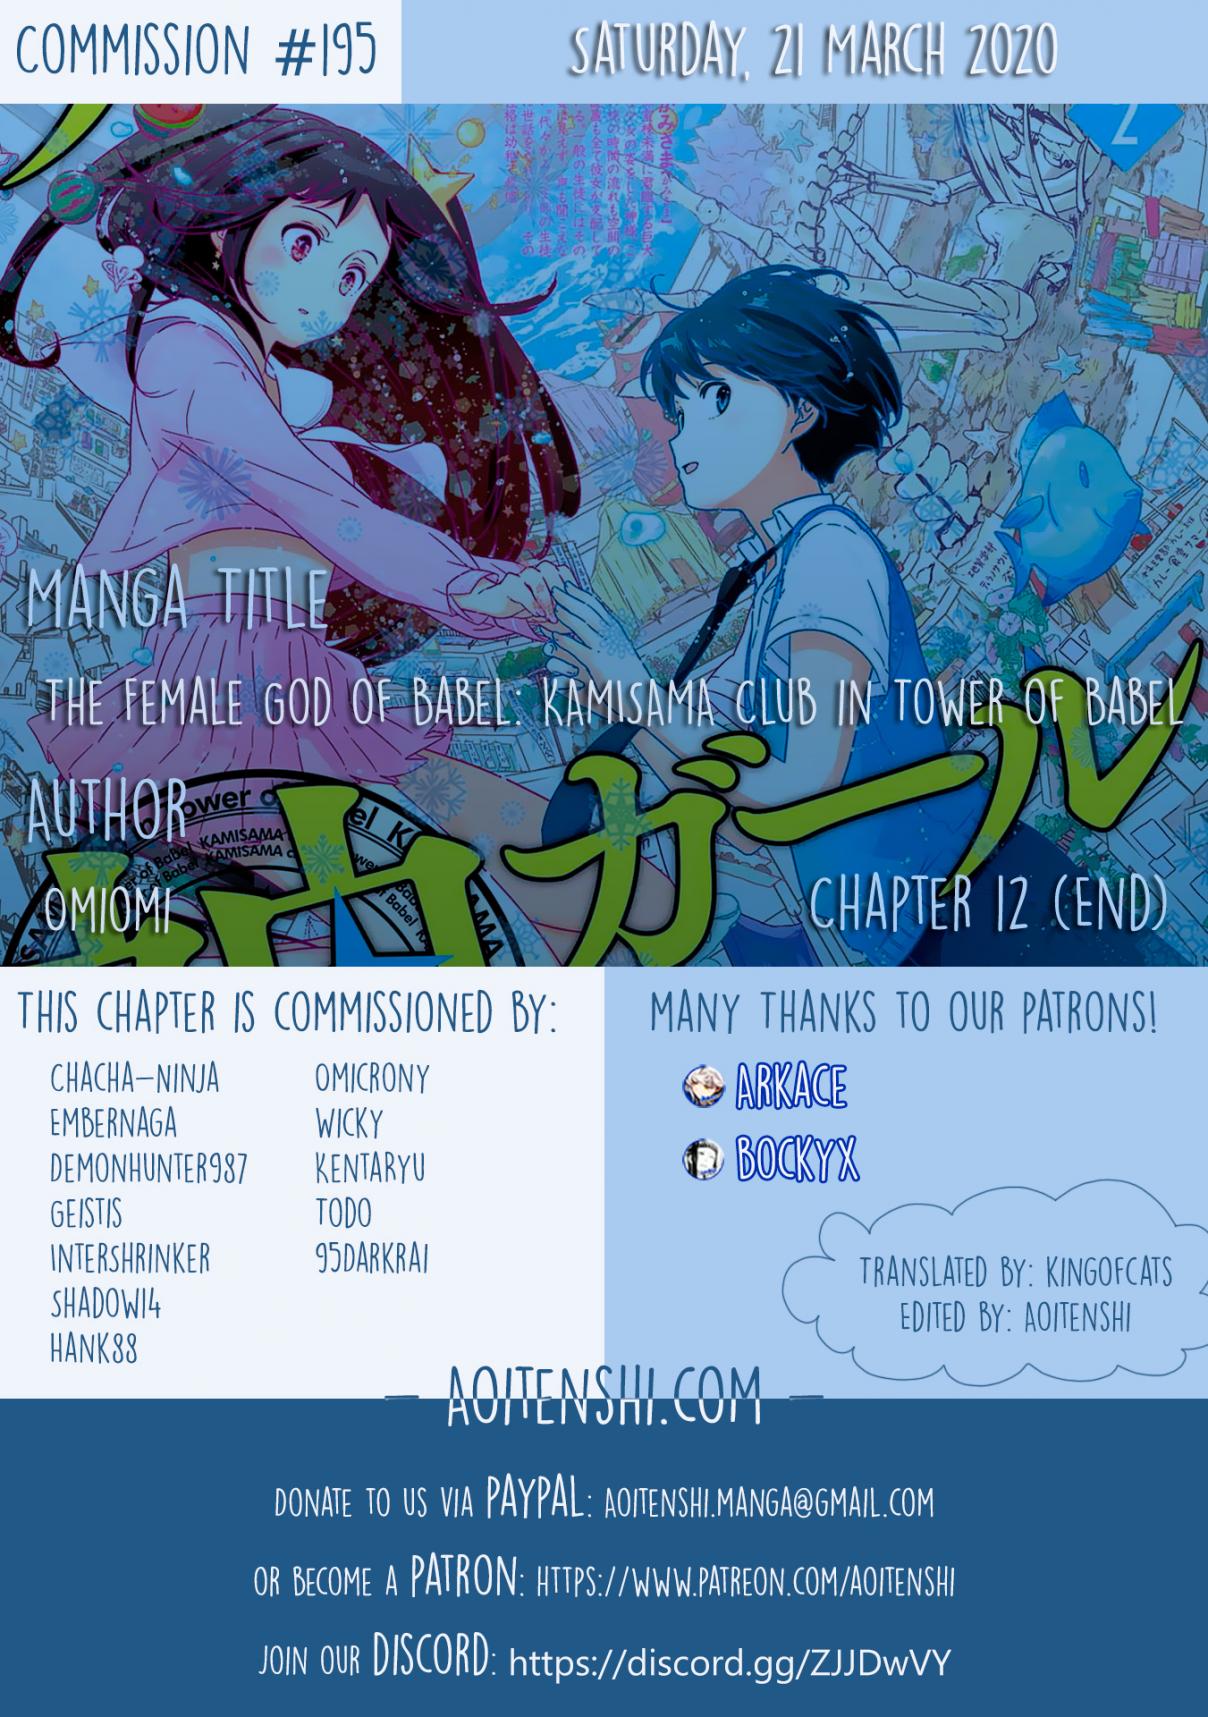 The Female God of Babel: KAMISAMA Club in Tower of Babel Vol. 2 Ch. 12 My Name Is...